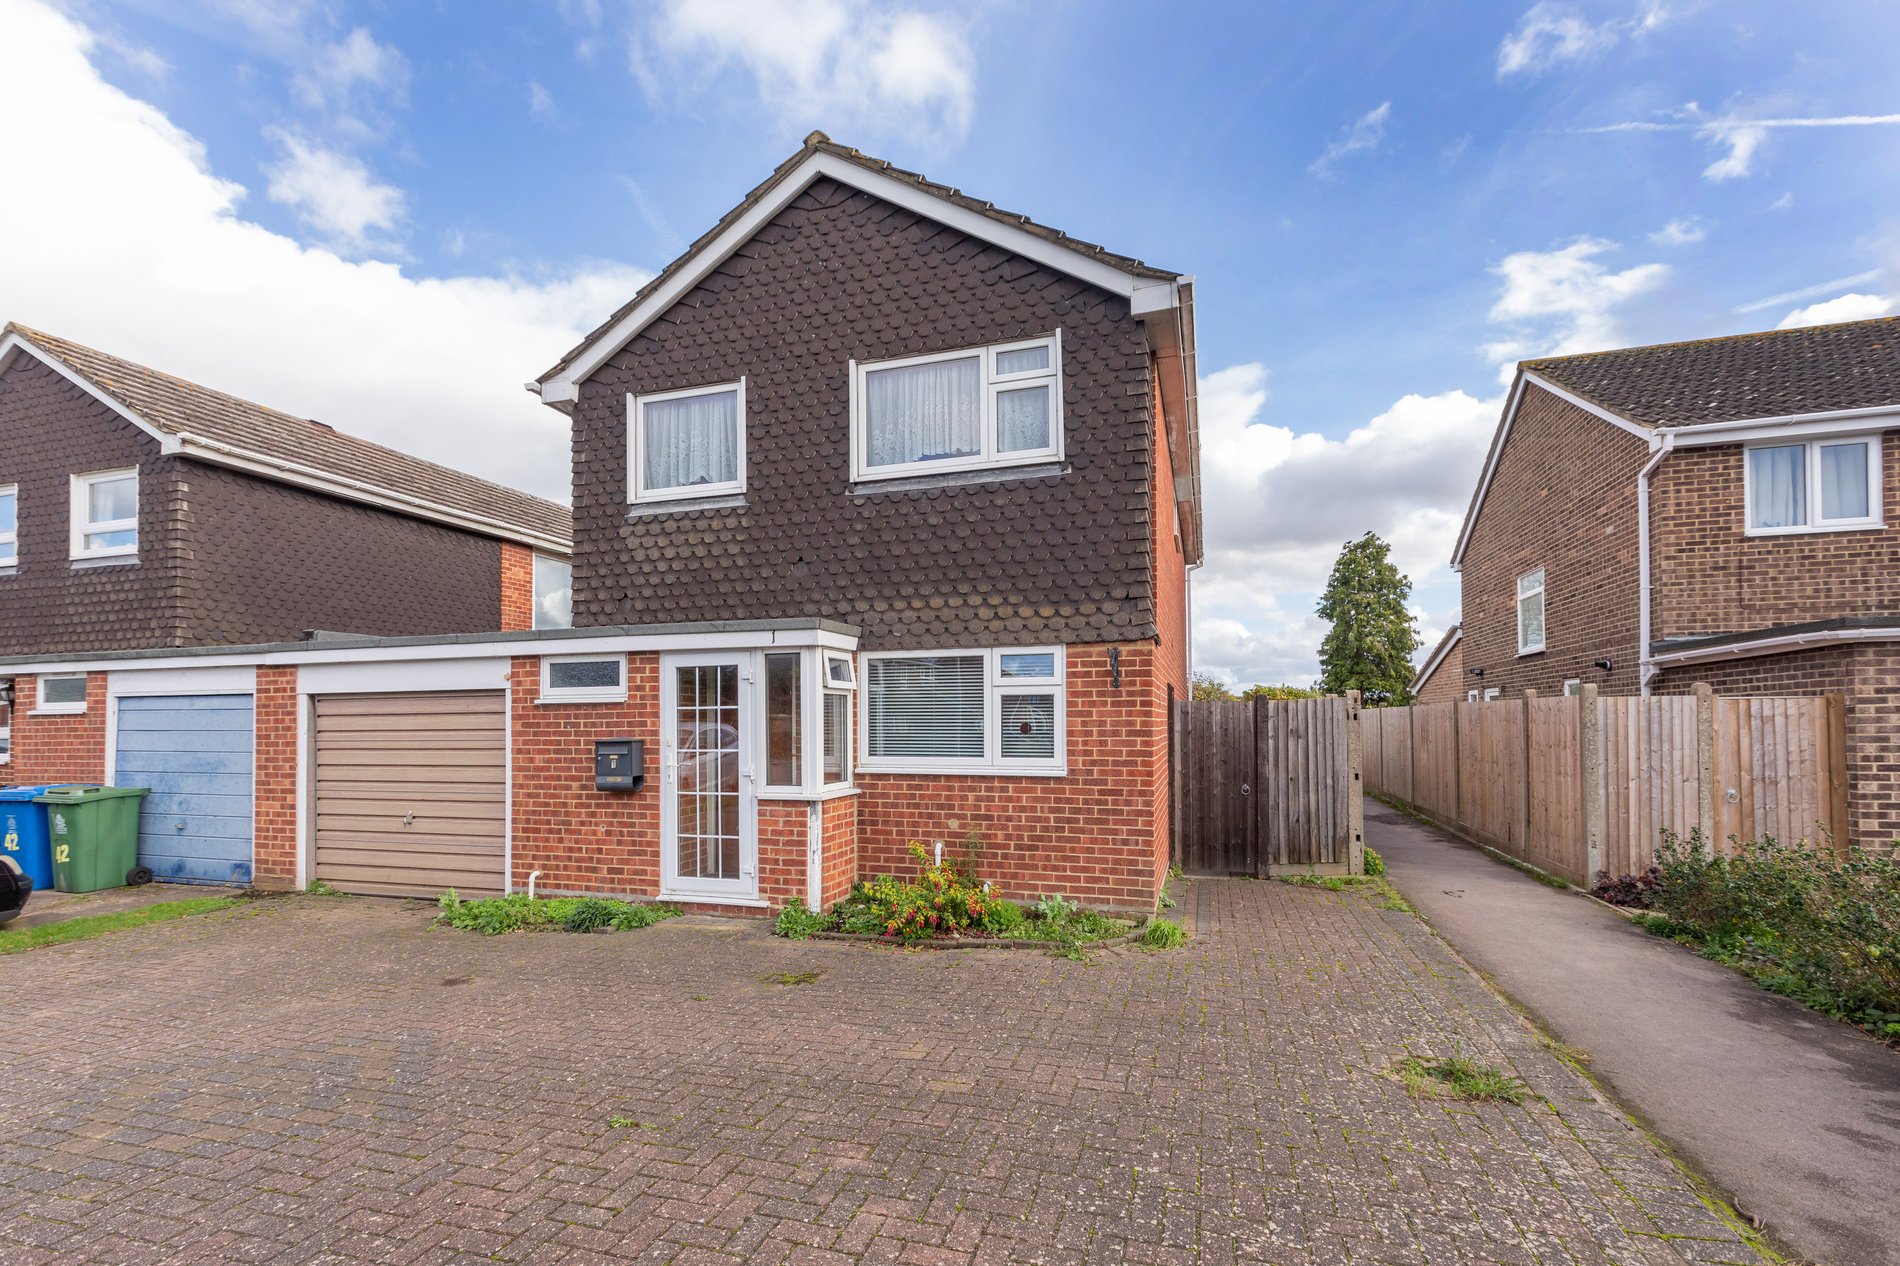 4 bed detached house for sale in Tithe Close, Maidenhead  - Property Image 2